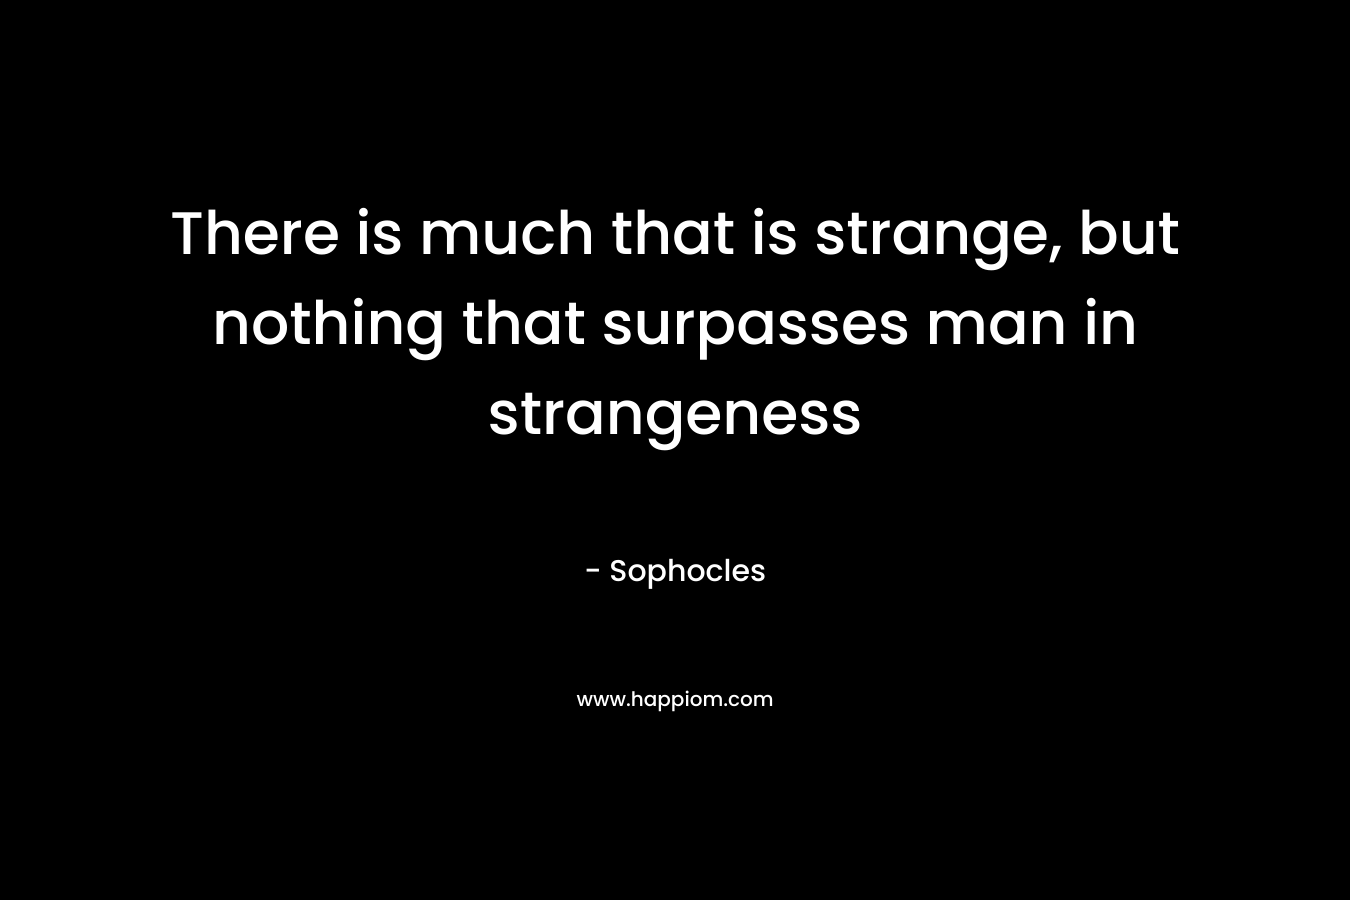 There is much that is strange, but nothing that surpasses man in strangeness – Sophocles